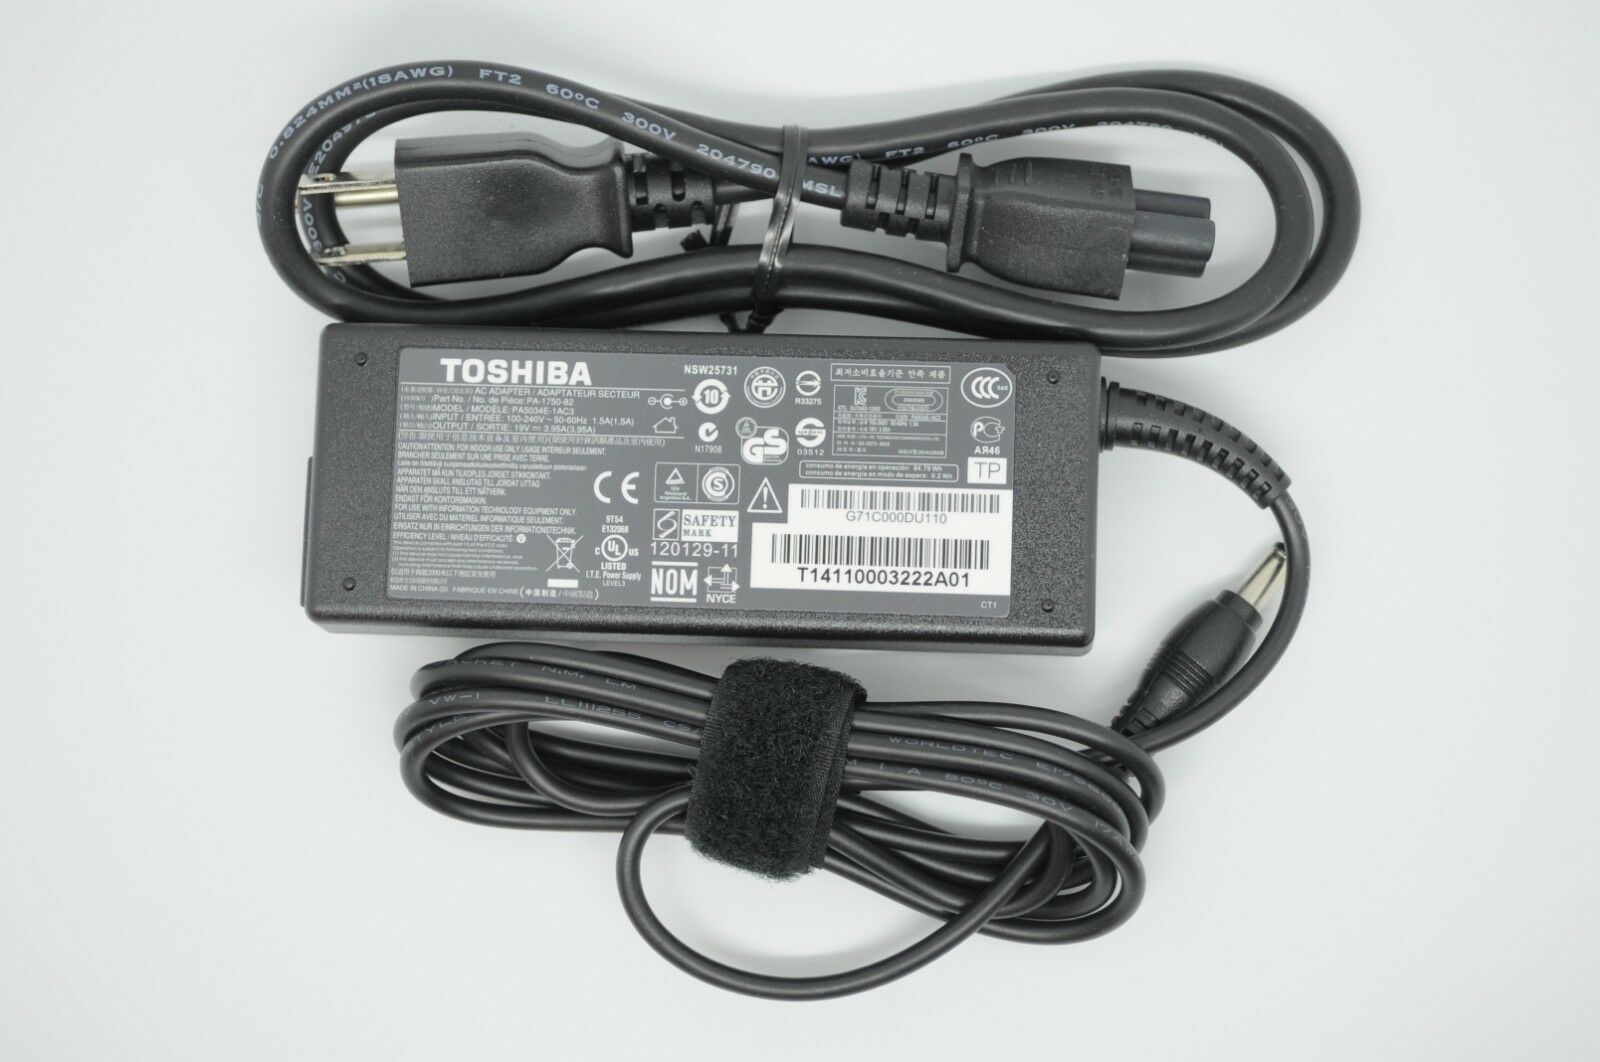 Toshiba PSAFGU-05F01D Ac Adapter Power Supply Cord Cable Charger Genuine Original